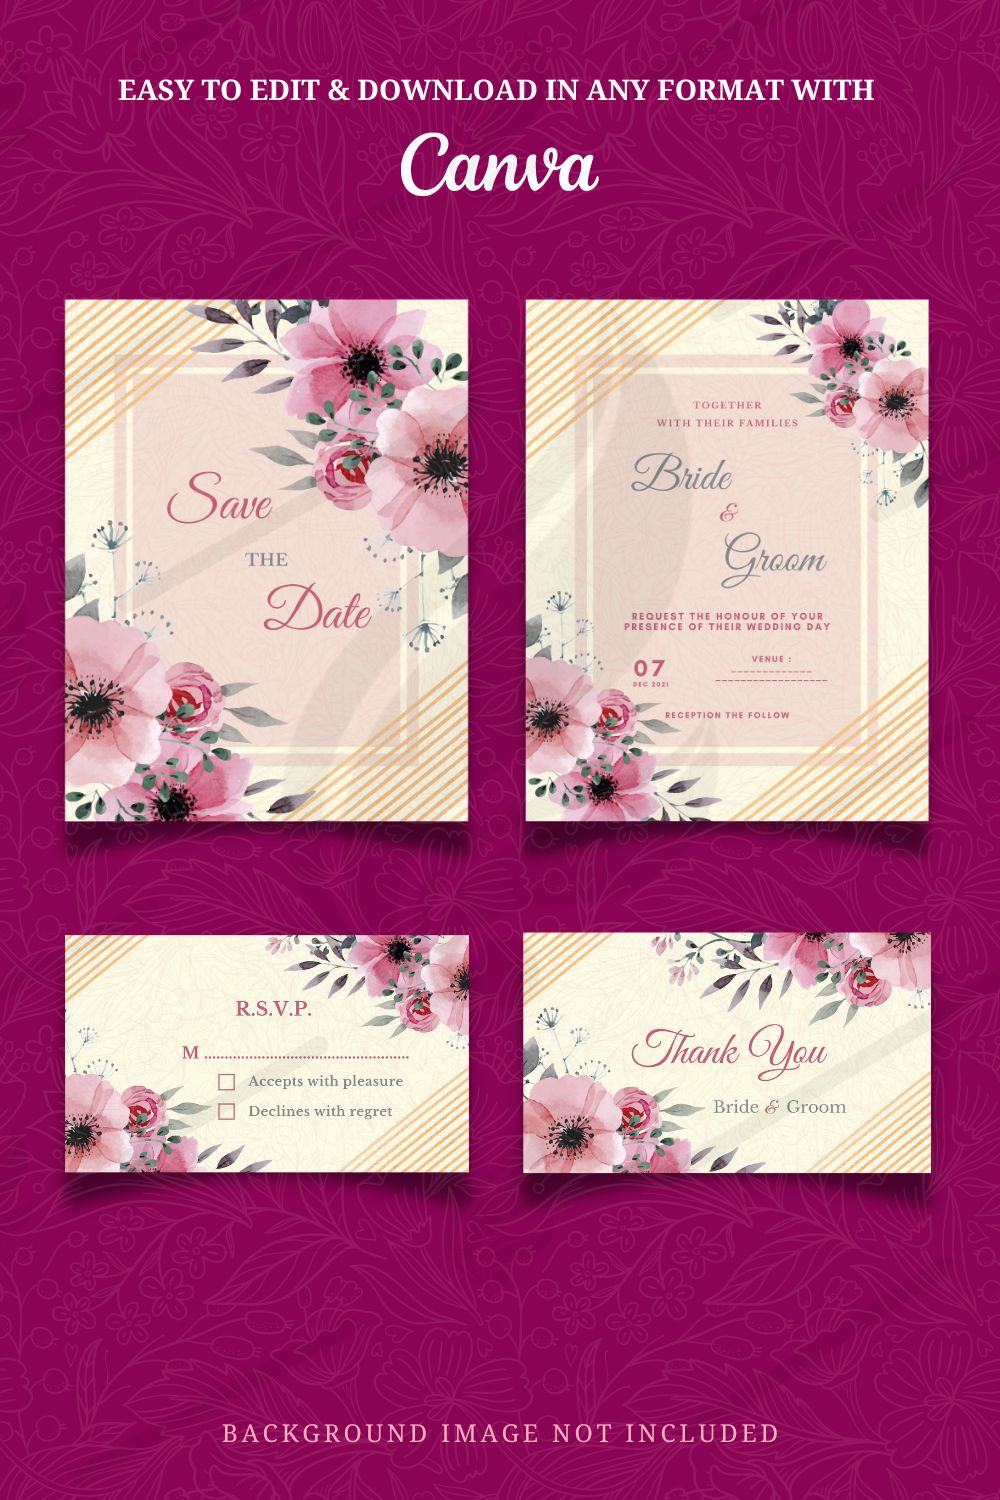 Abstract Wedding Card Template Canva pinterest image.